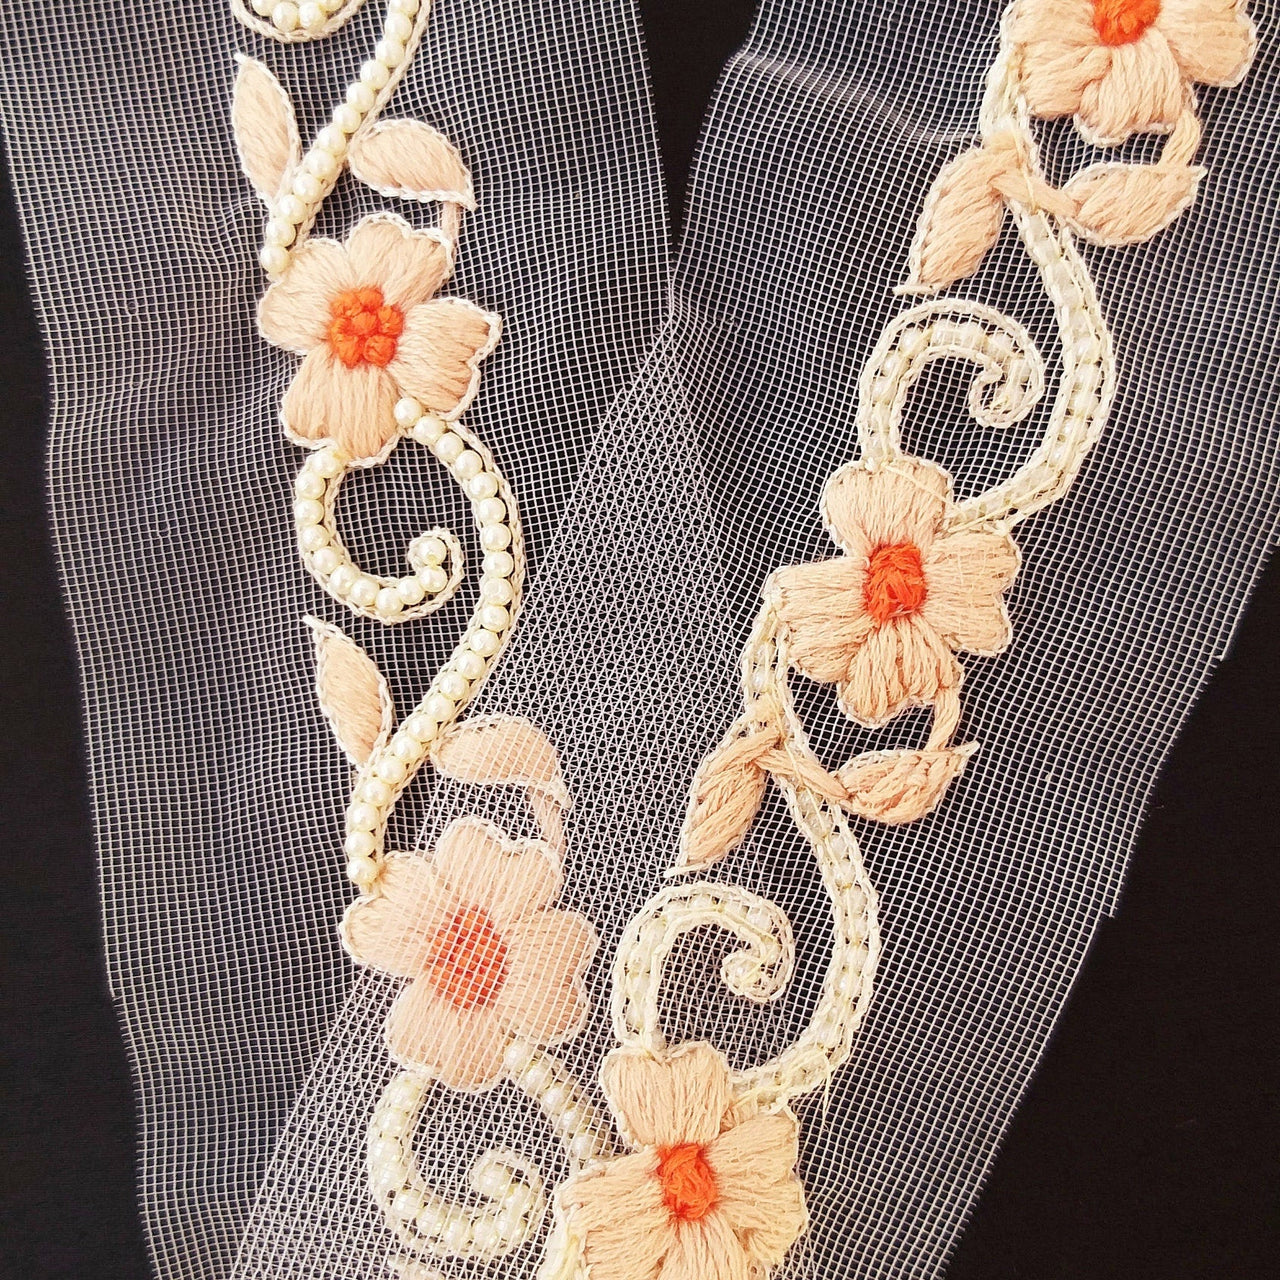 Beige Net Trim With Floral Embroidery, Pearl Beads Trim, Beaded Trim